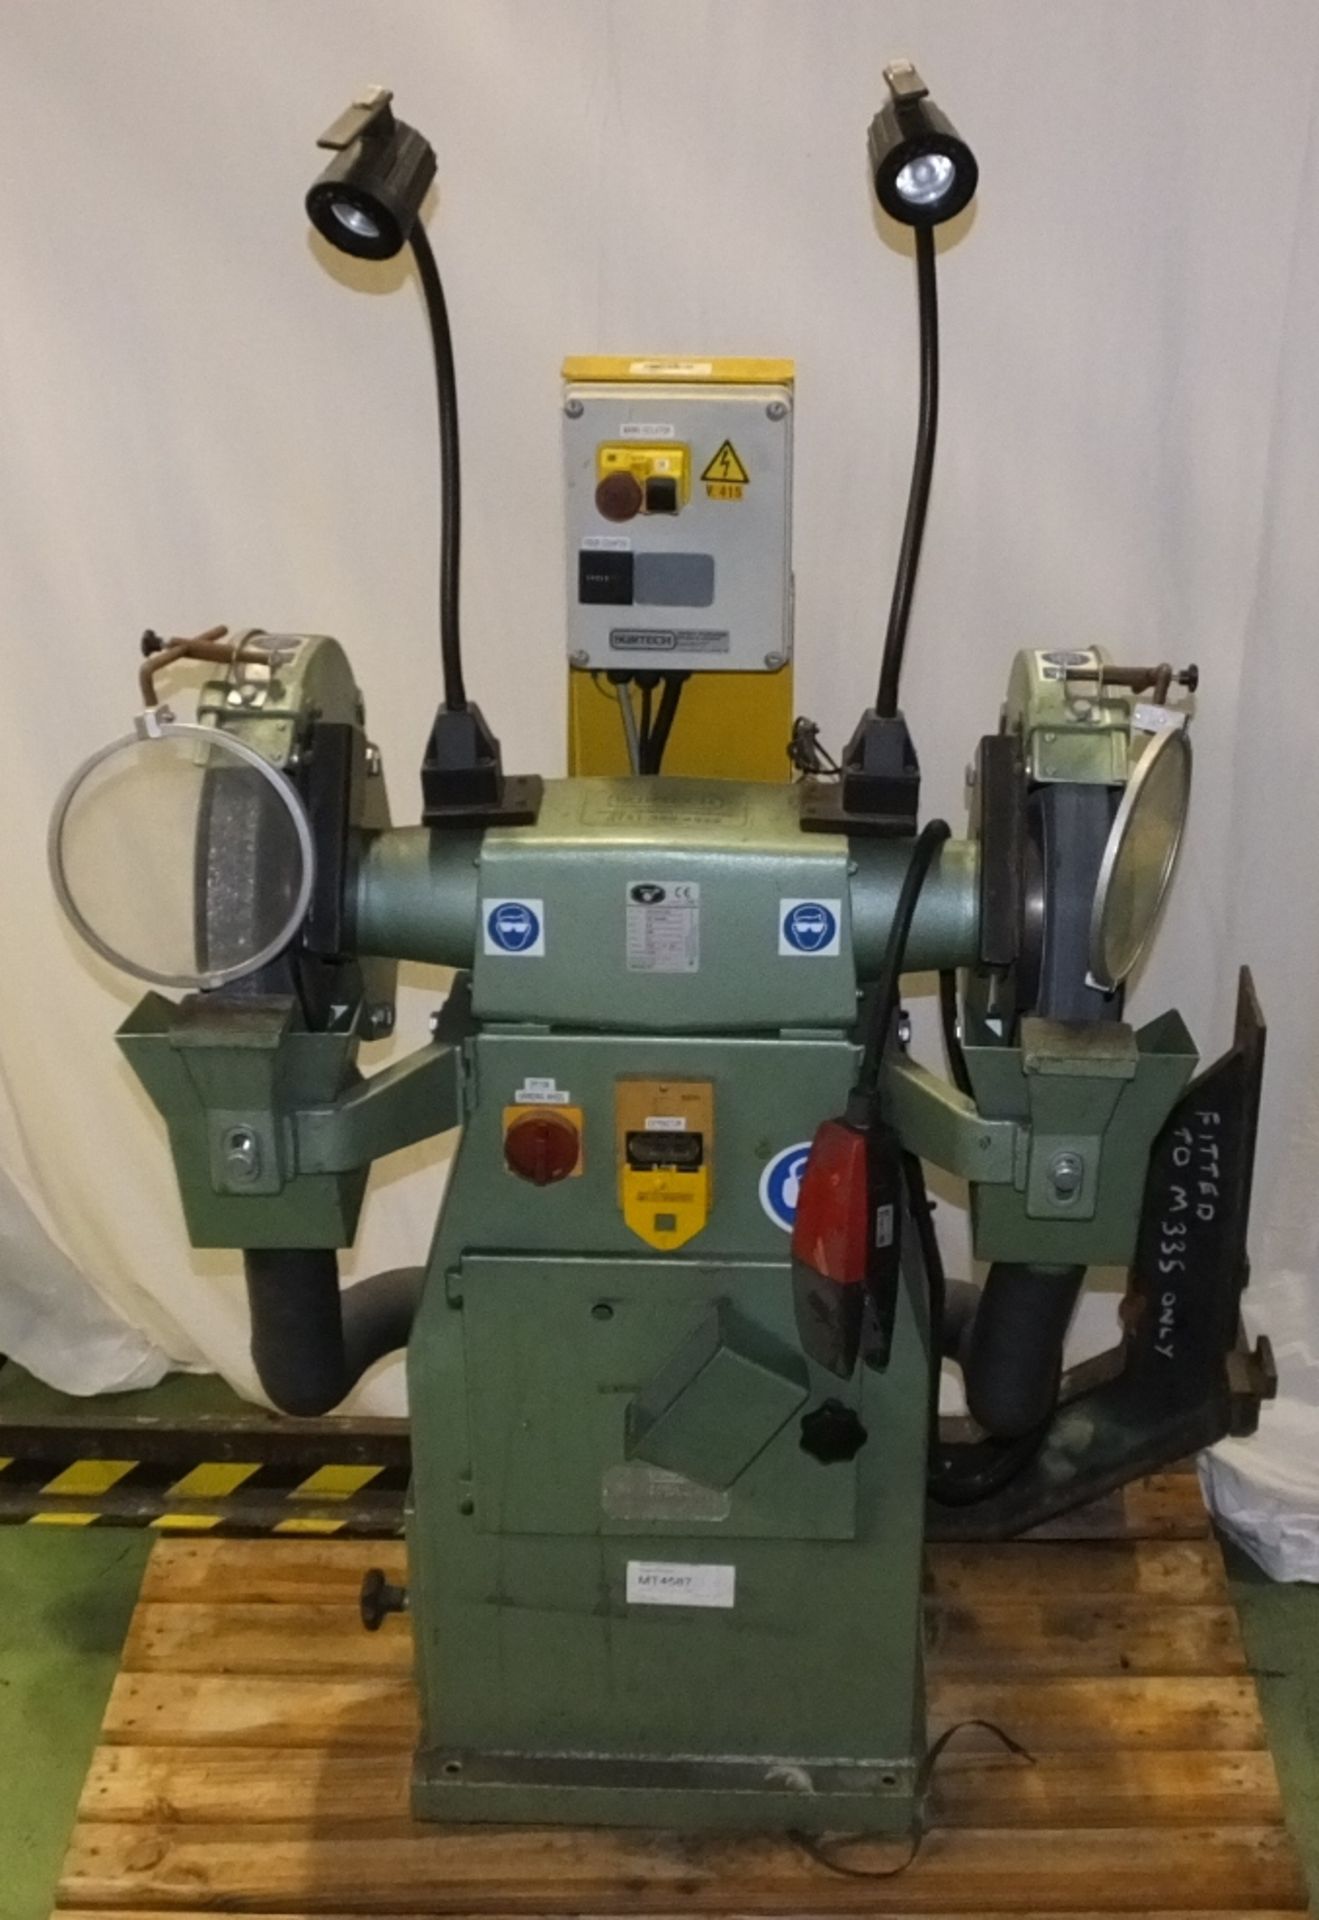 Roma Double Headed Grinder 30/40 - 400V - 5.1A - Serial 0512032.001 - hours run 40 - £5 Lo